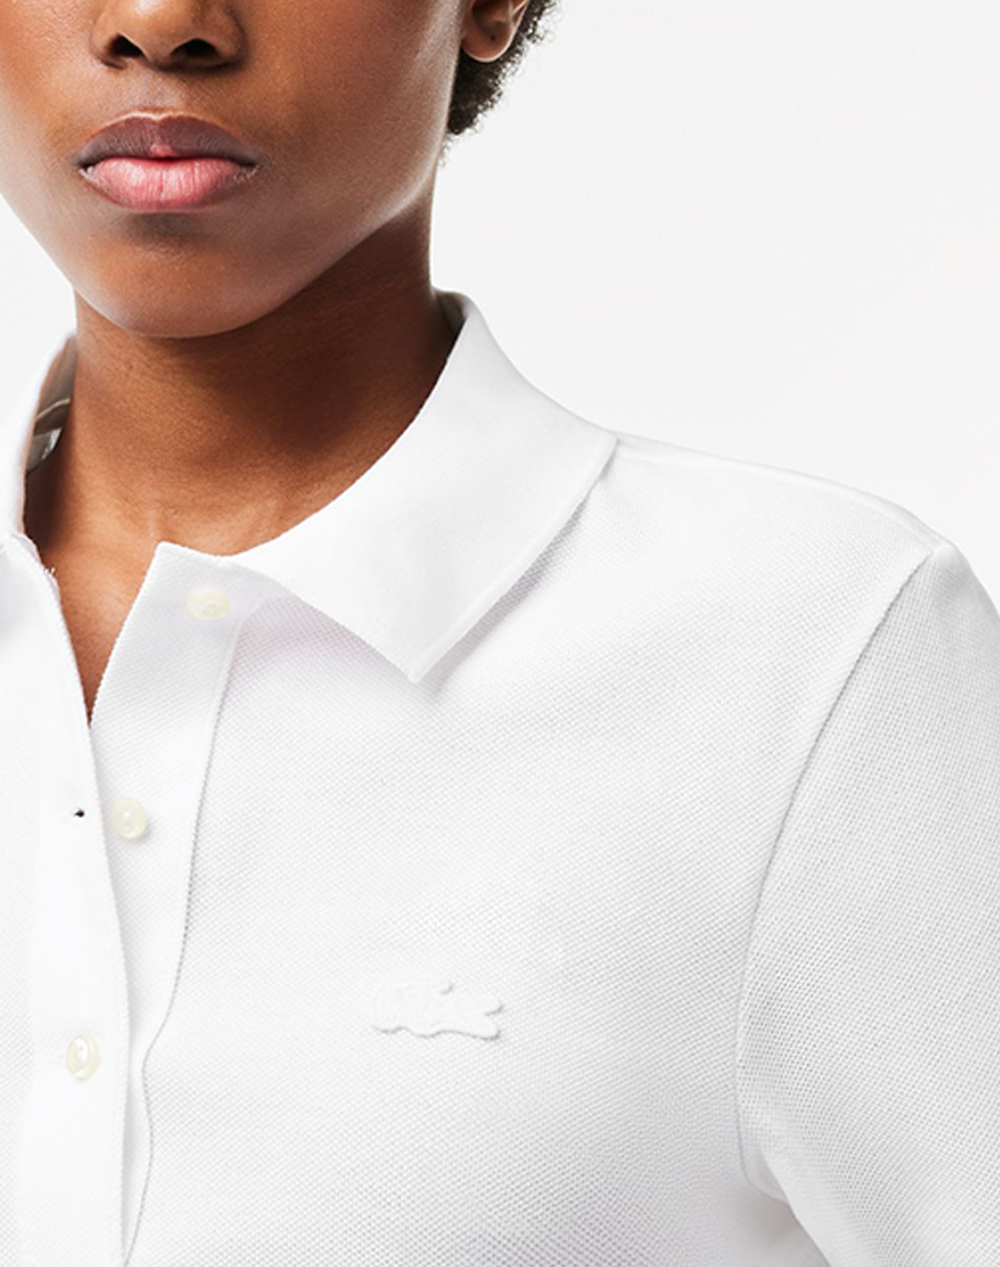 LACOSTE SHORT SLEEVED RIBBED COLLAR SHIRT